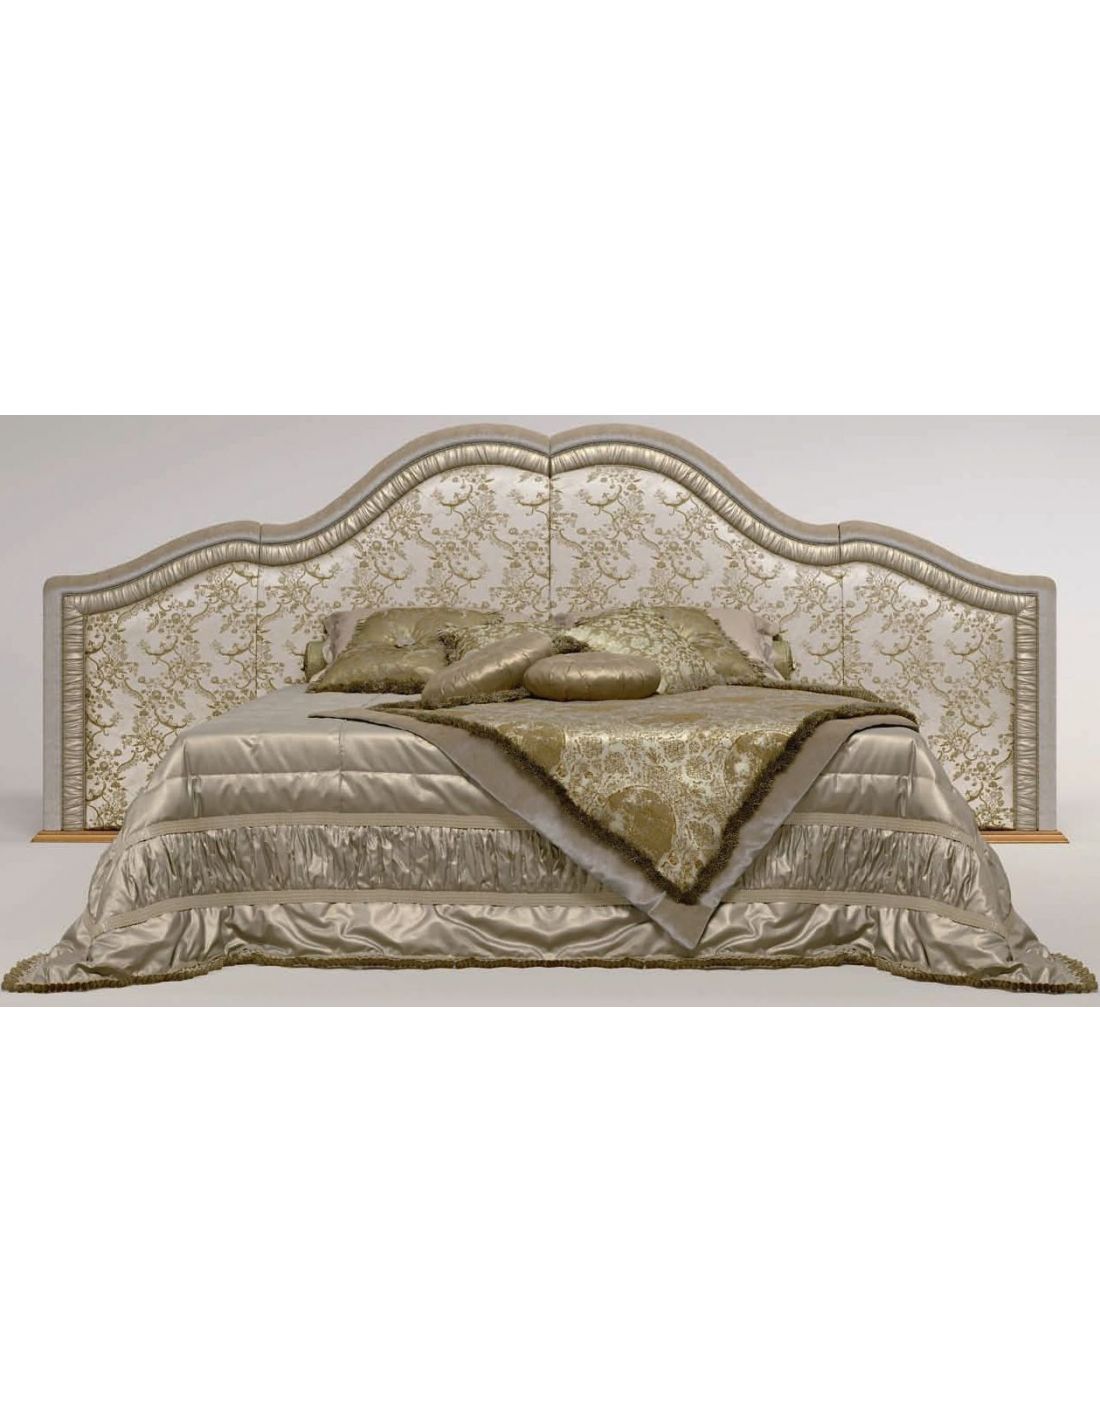 Oversized Arched Headboard Bed, Oversized Headboard King Bed